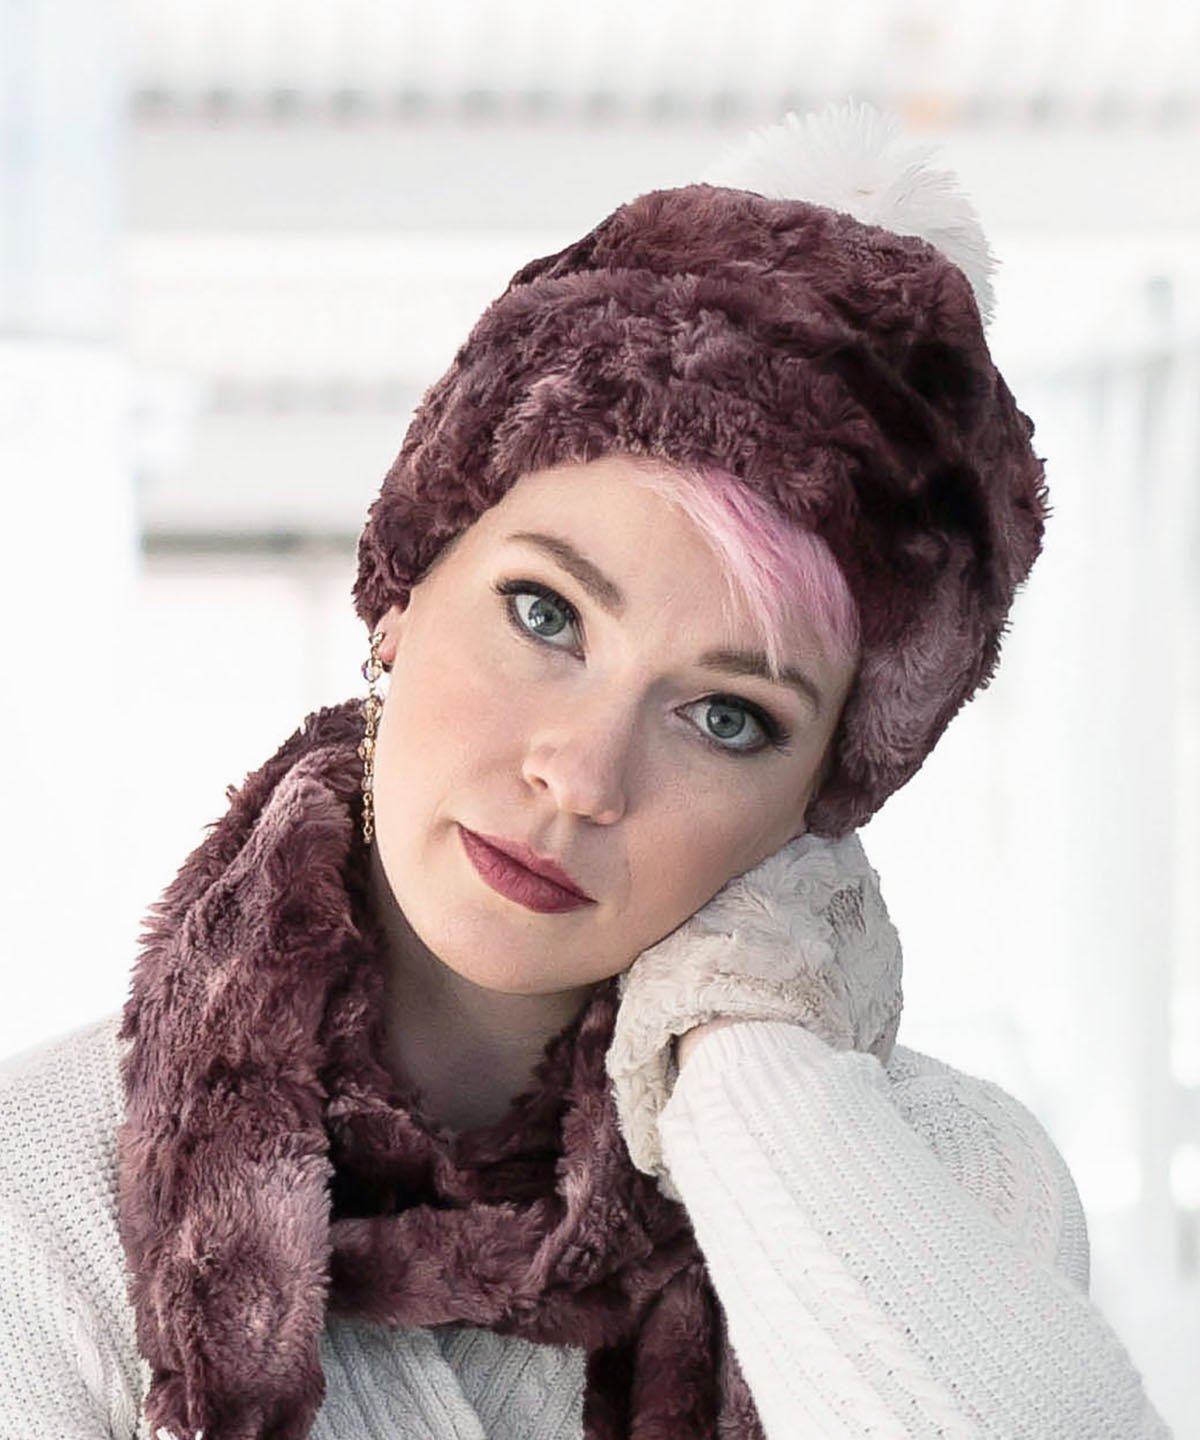 Woman modeling Beanie Hat, reversible in Luxury Faux Fur - Highland Thistle lined in Cuddly Black Faux Fur. Pandemonium Millinery in Seattle, WA.